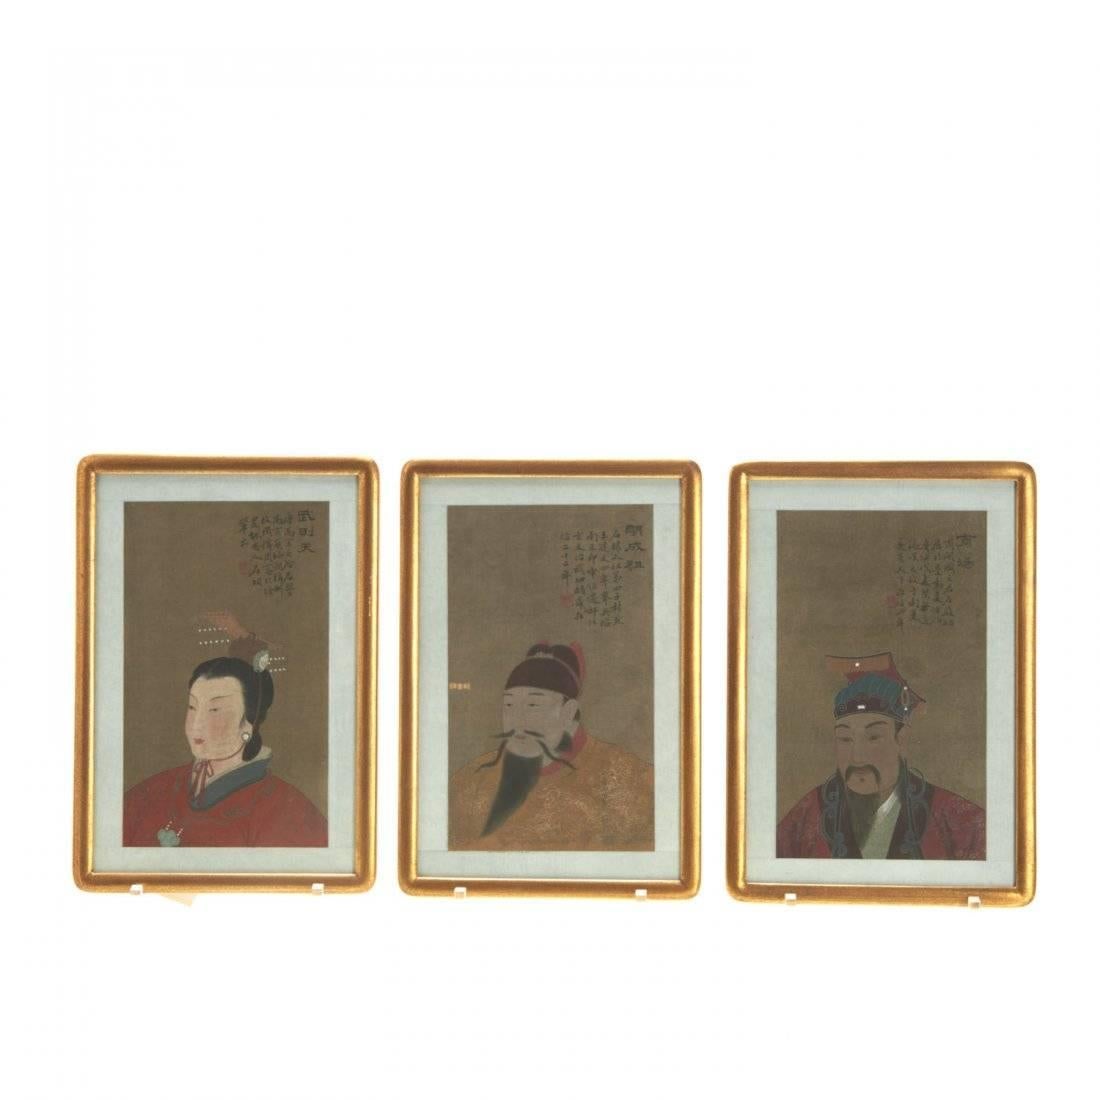 Set of antique Chinese ancestral portraits, 19th-20th century, pigment on silk, with inscriptions and red seal mark, upper right, matted and framed under glass.

Print Size: 12 x 7.25 inches
Framed: 11 x 16 inches

